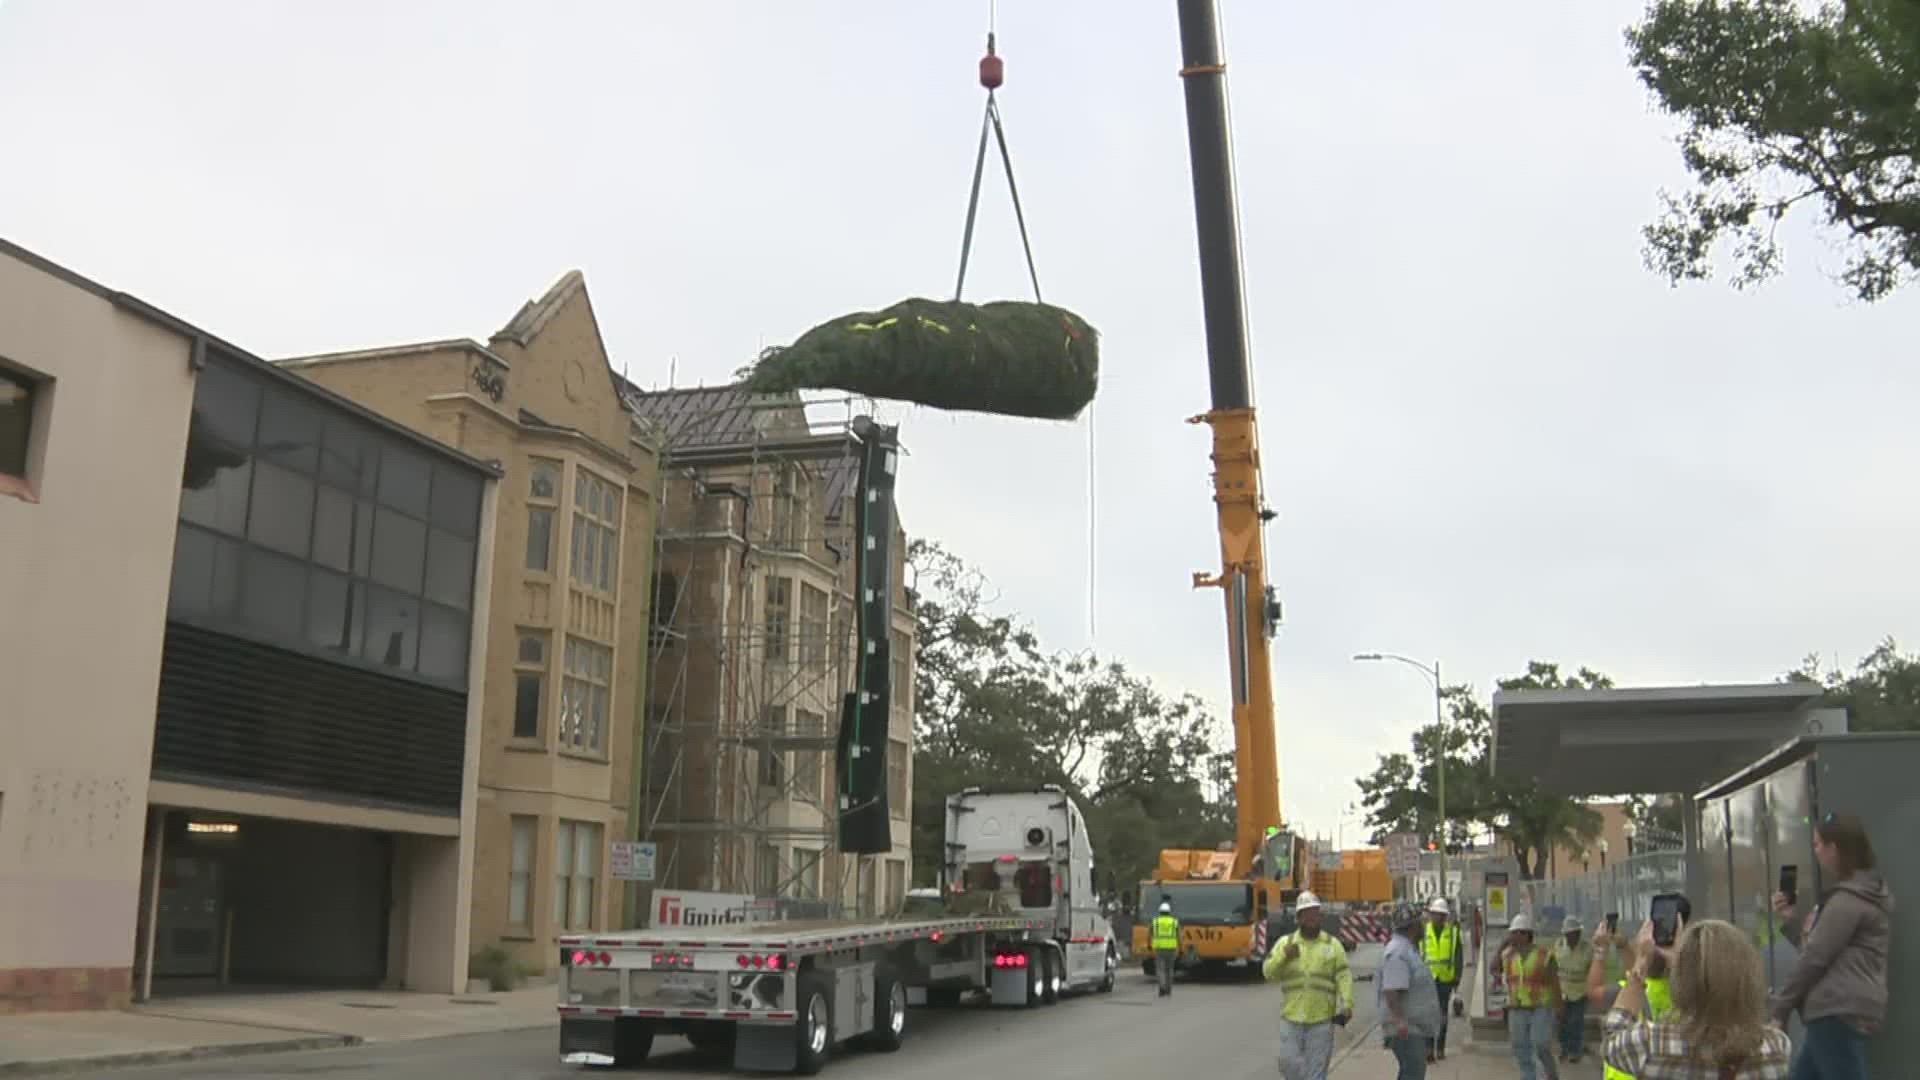 The massive tree arrived Tuesday morning with workers using a crane to get it in the right spot at its usual location.